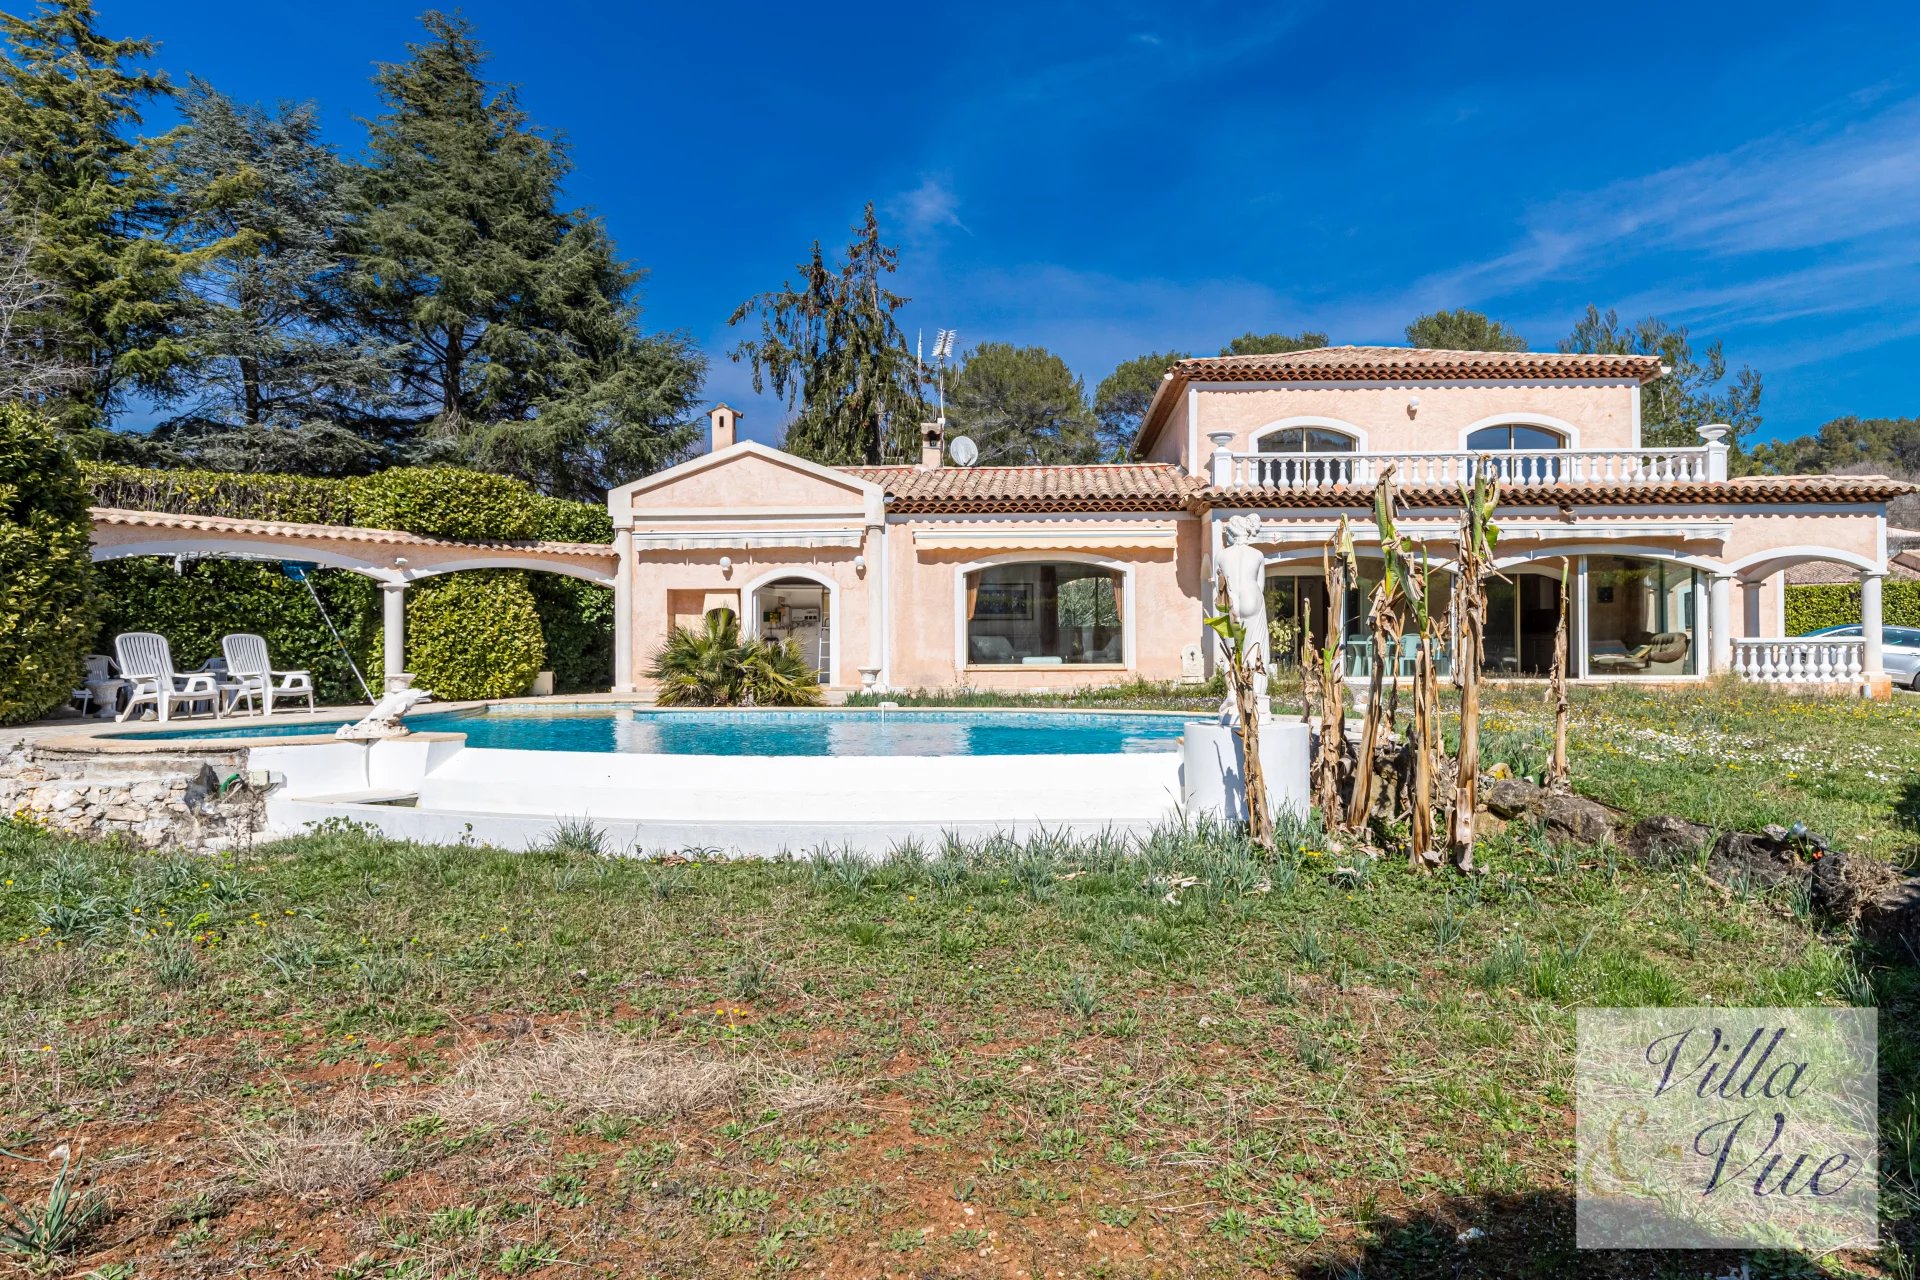 Neo-provençal villa, in absolute calm, close to the centre, magnificent flat land